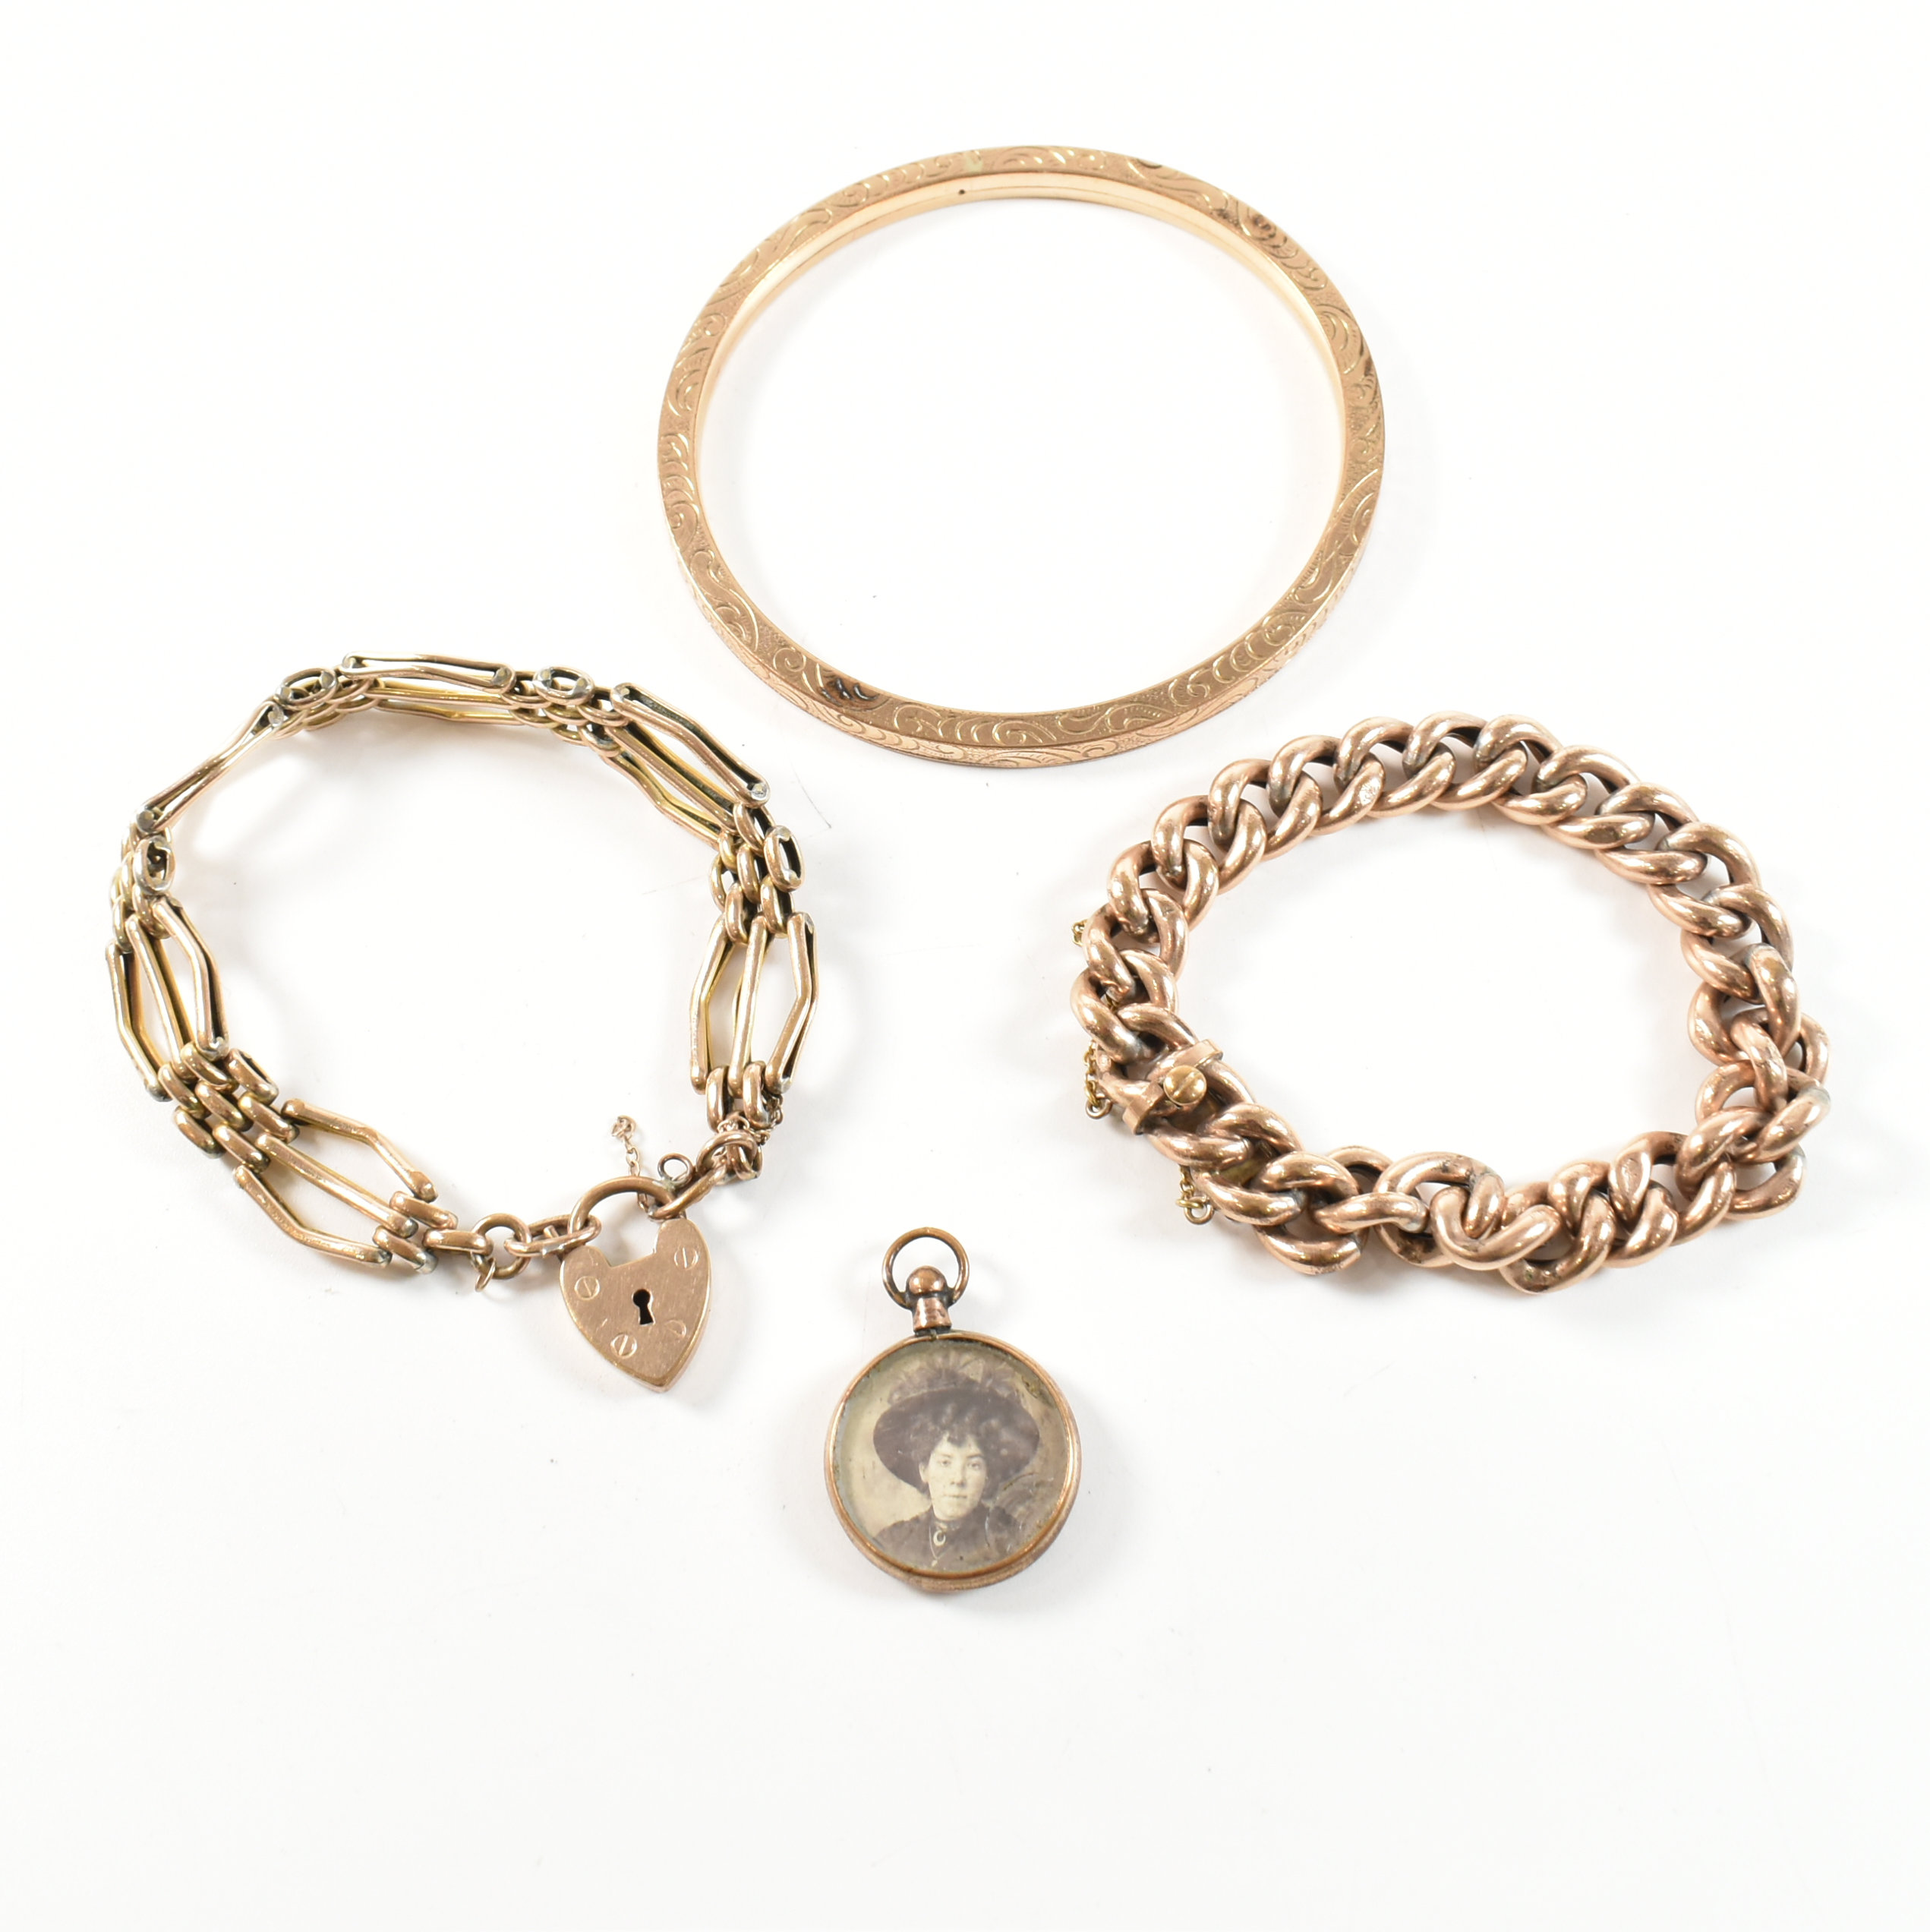 SELECTION OF ANTIQUE & VINTAGE ROLLED GOLD JEWELLERY